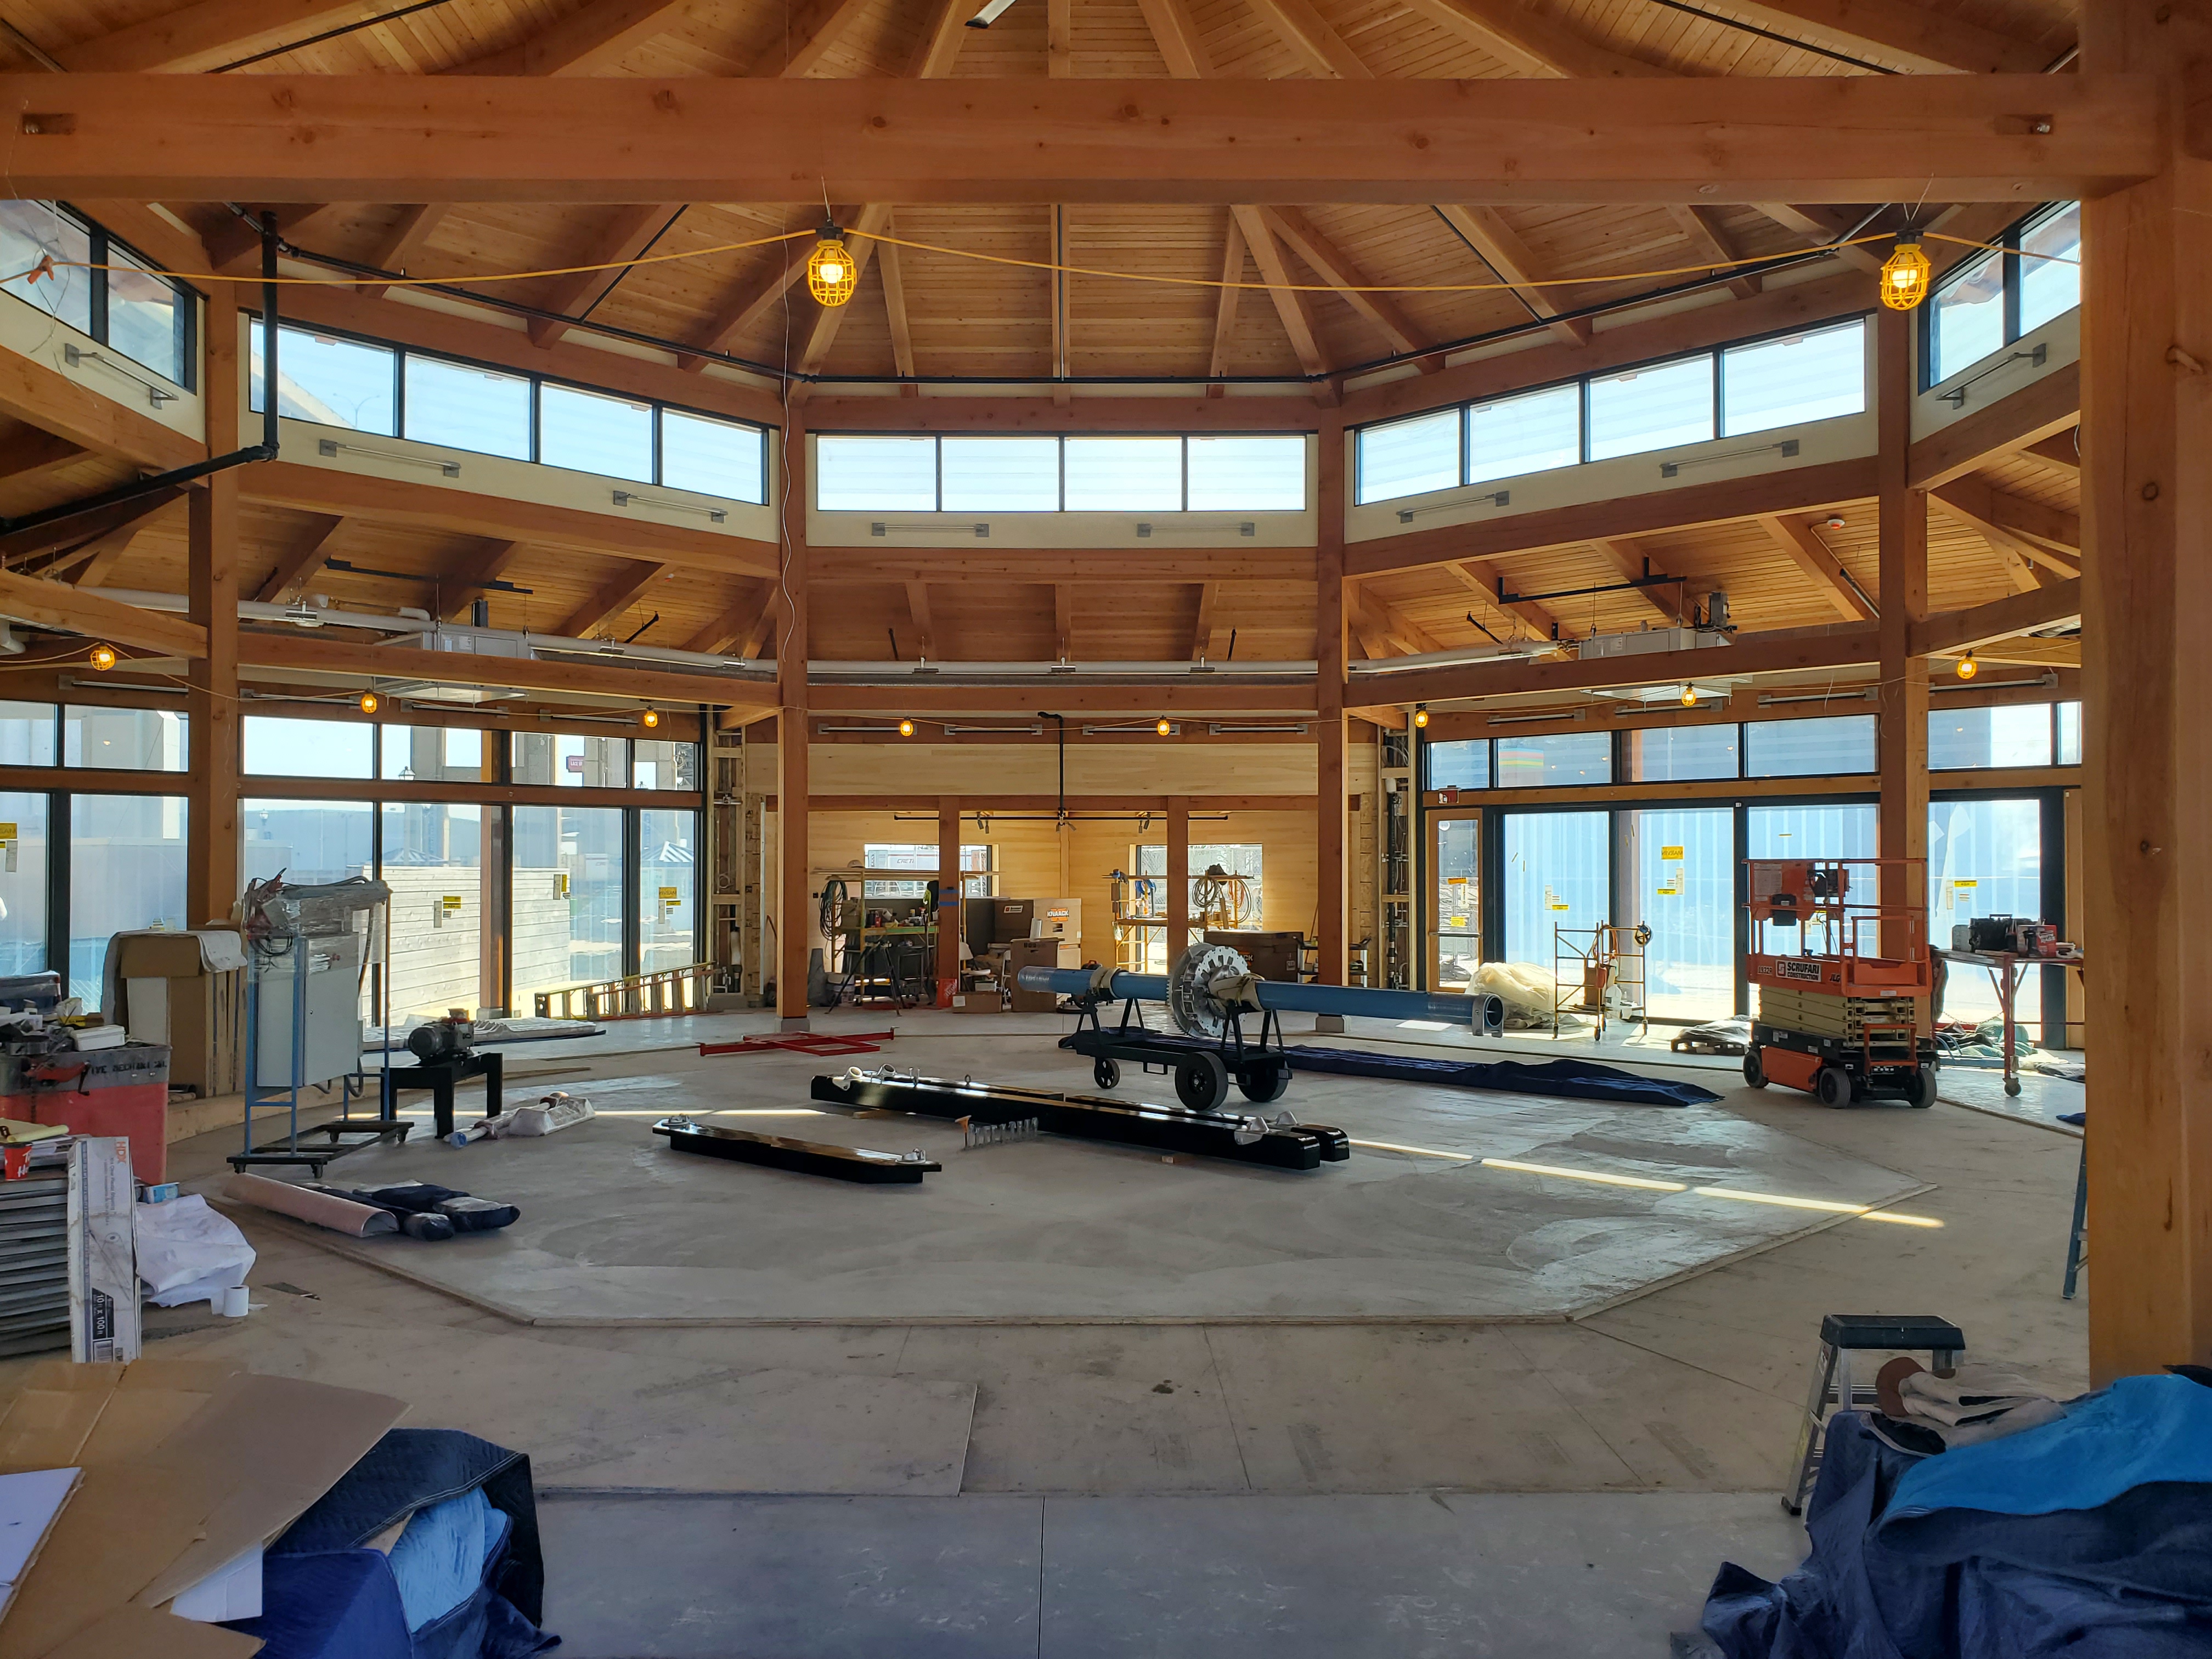 Timber Frame Carousel with New Energy Works and The Buffalo Heritage Carousel,Inc.